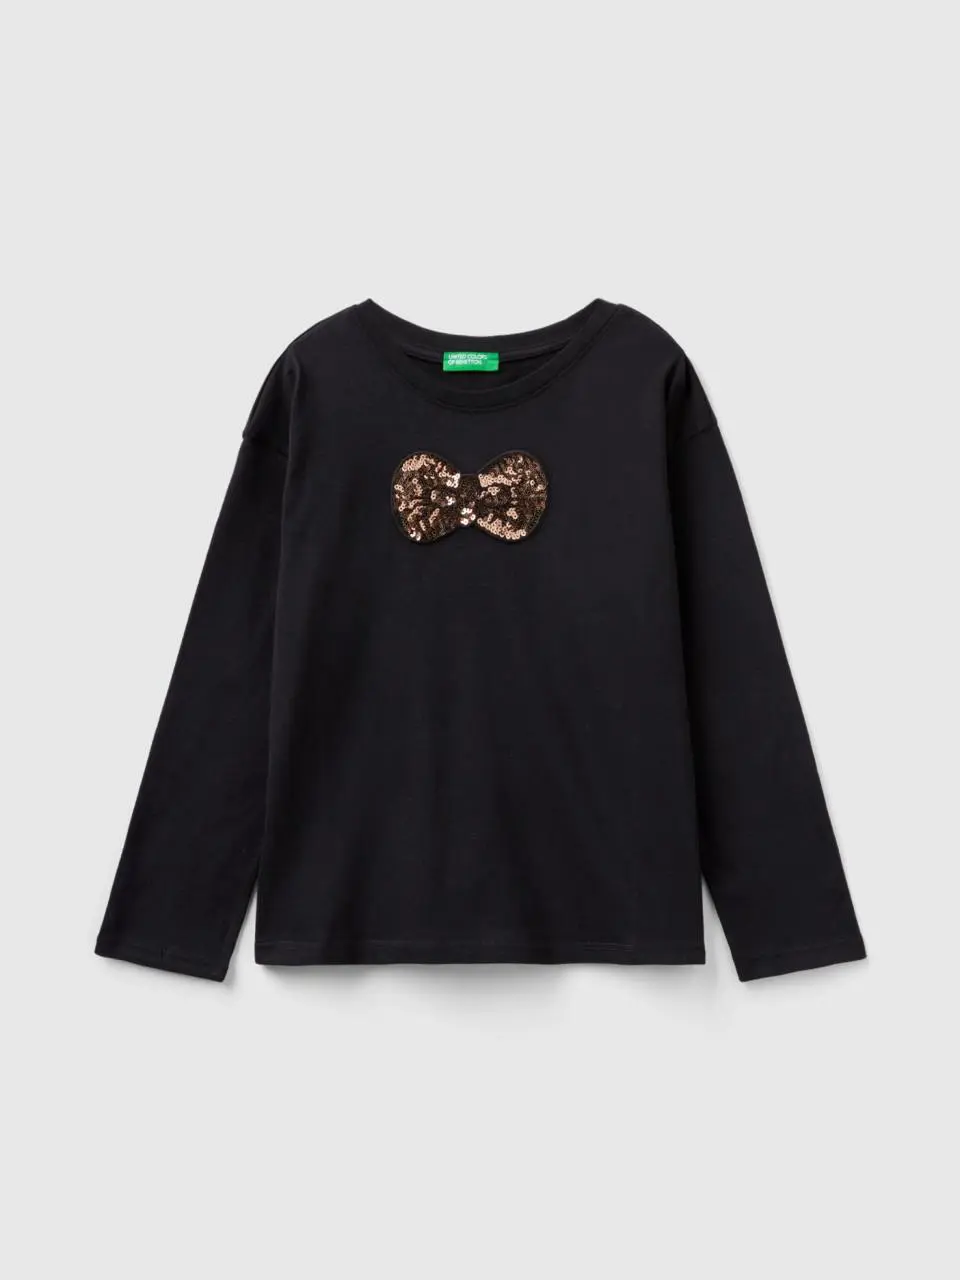 Benetton warm cotton t-shirt with sequins. 1